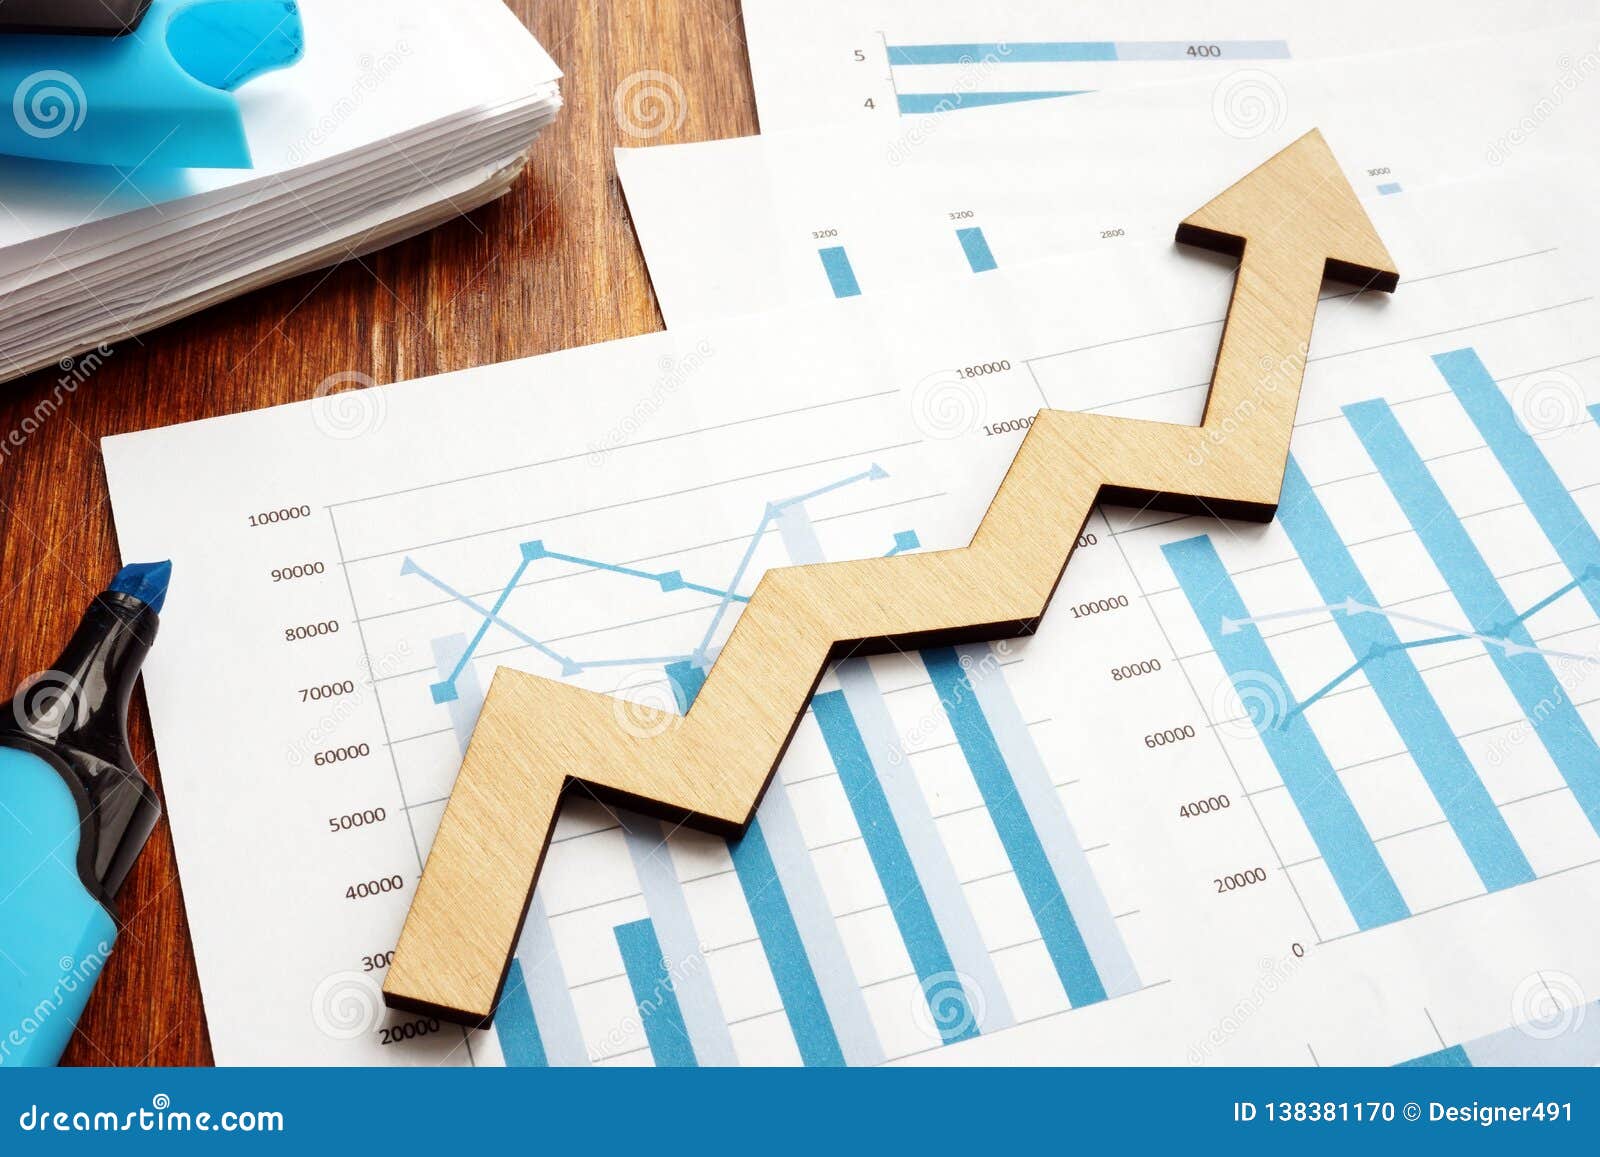 business growth. wooden arrow and financial reports